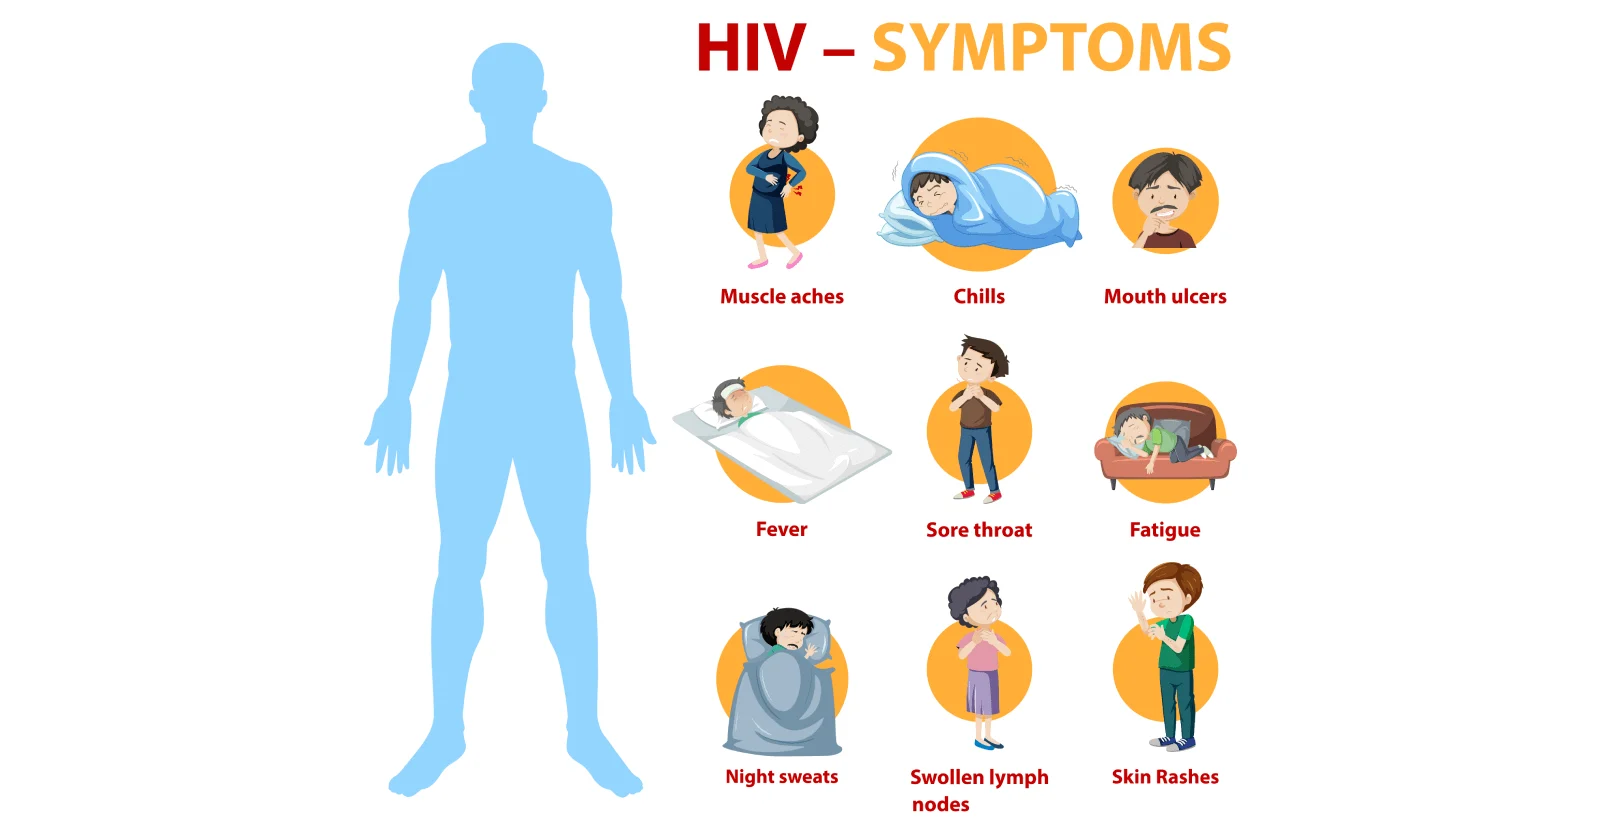 Overview of HIV/AIDS: Symptoms, causes, treatment and prevention